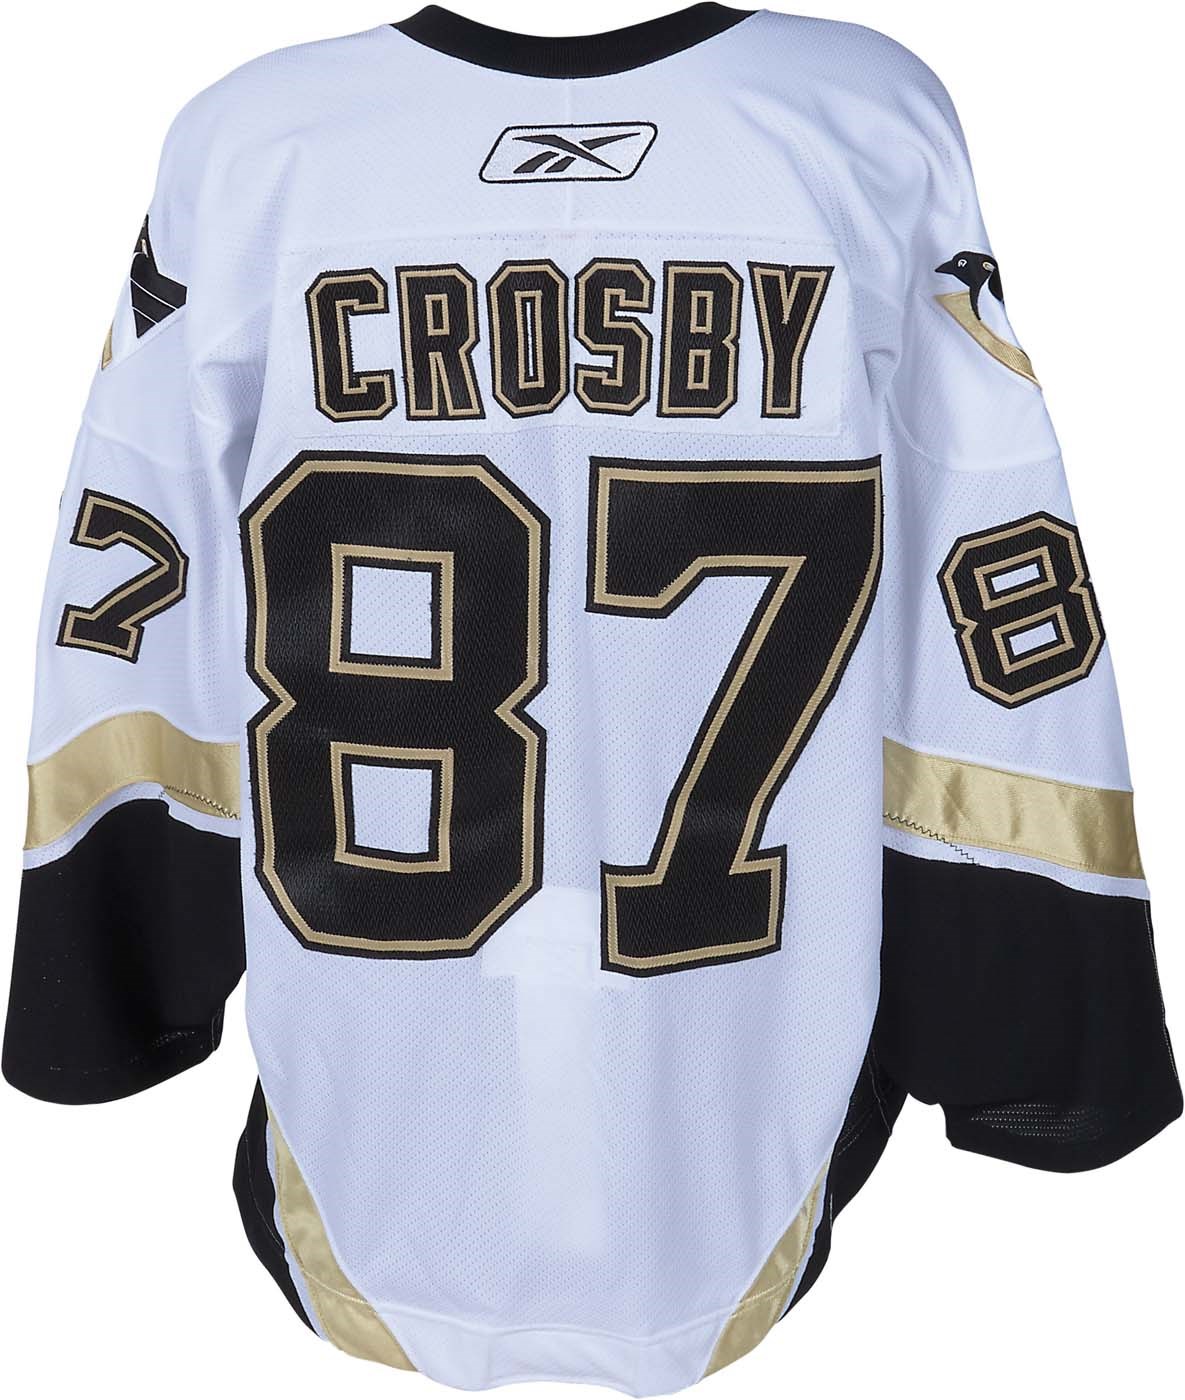 - 2005-06 Sidney Crosby Pittsburgh Penguins Game Issued Rookie Jersey